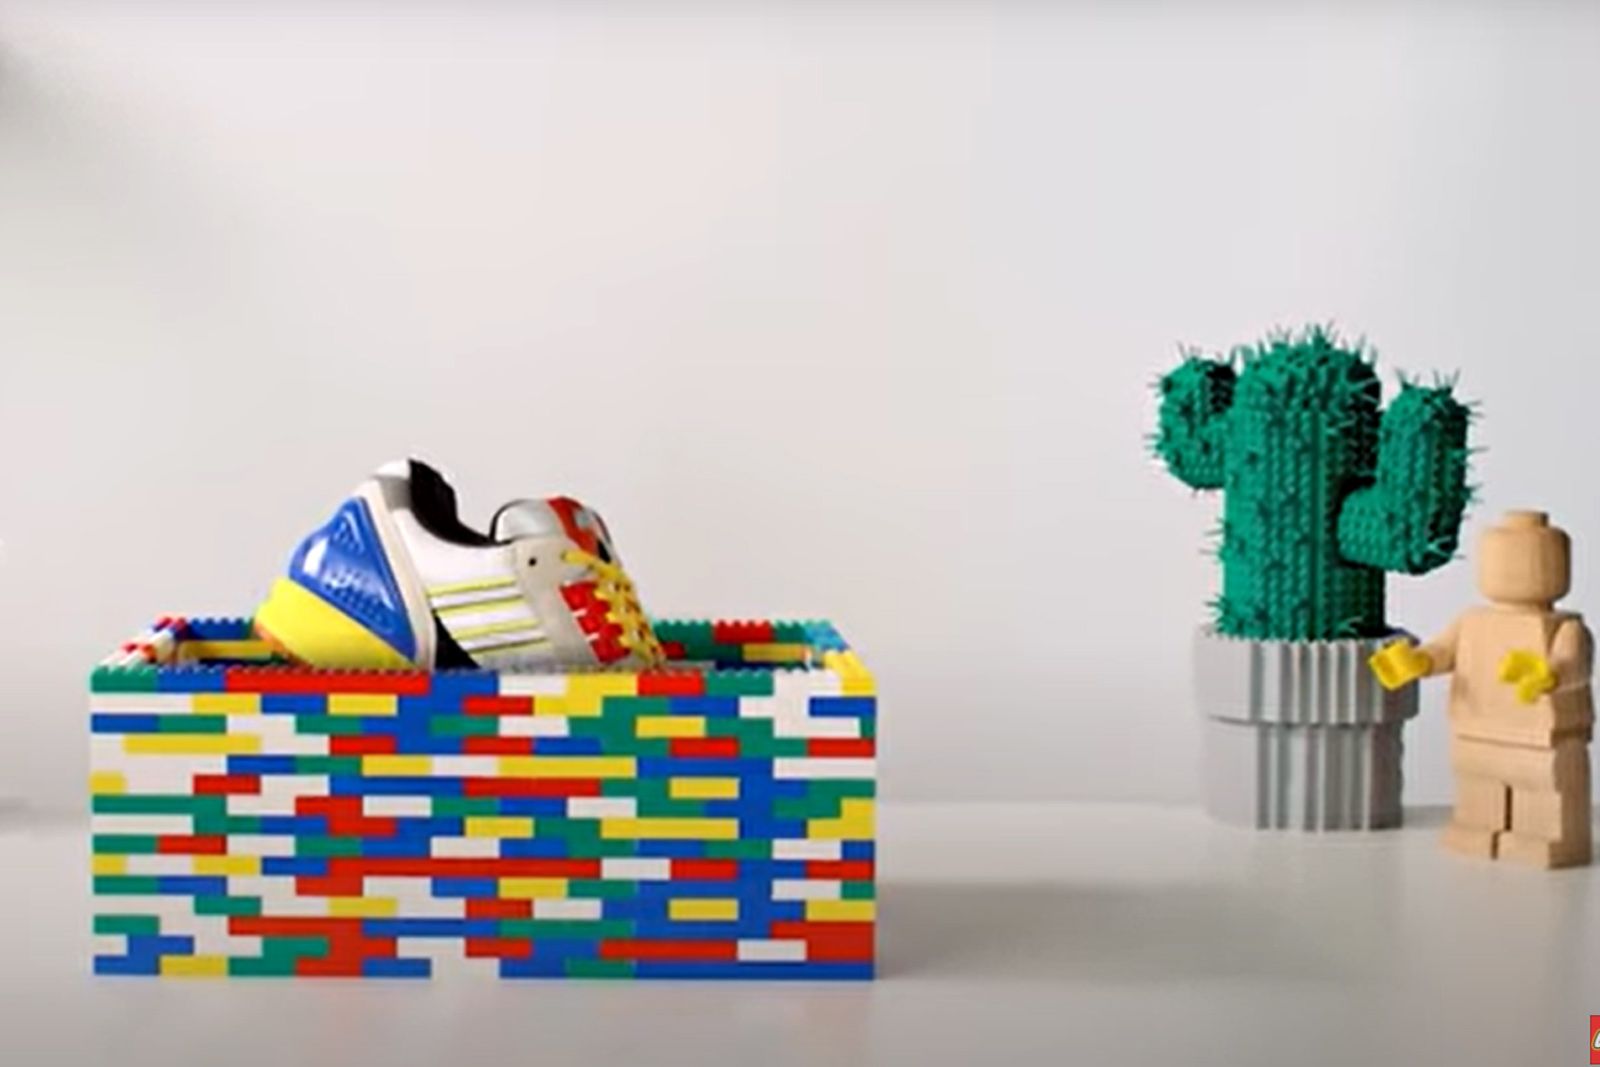 Adidas' latest A-ZX sneaks are a collab with Lego photo 3